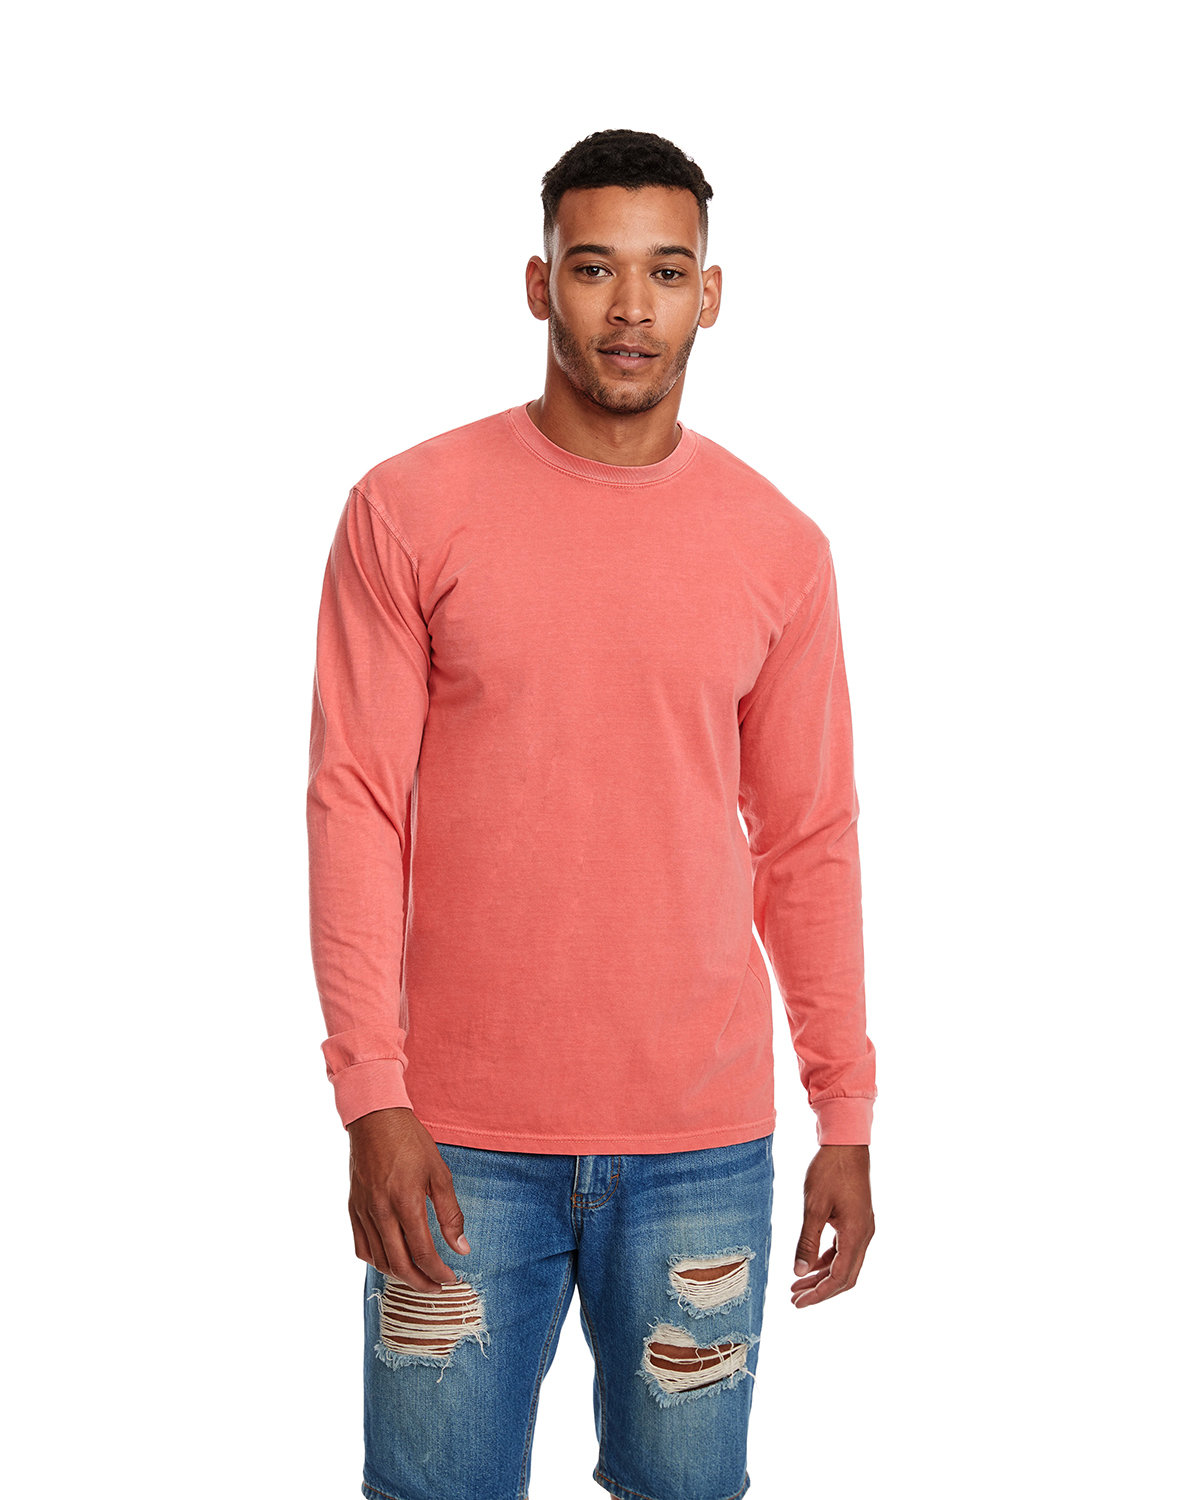 Next Level Apparel Adult Inspired Dye Long-Sleeve Crew with Pocket GUAVA 